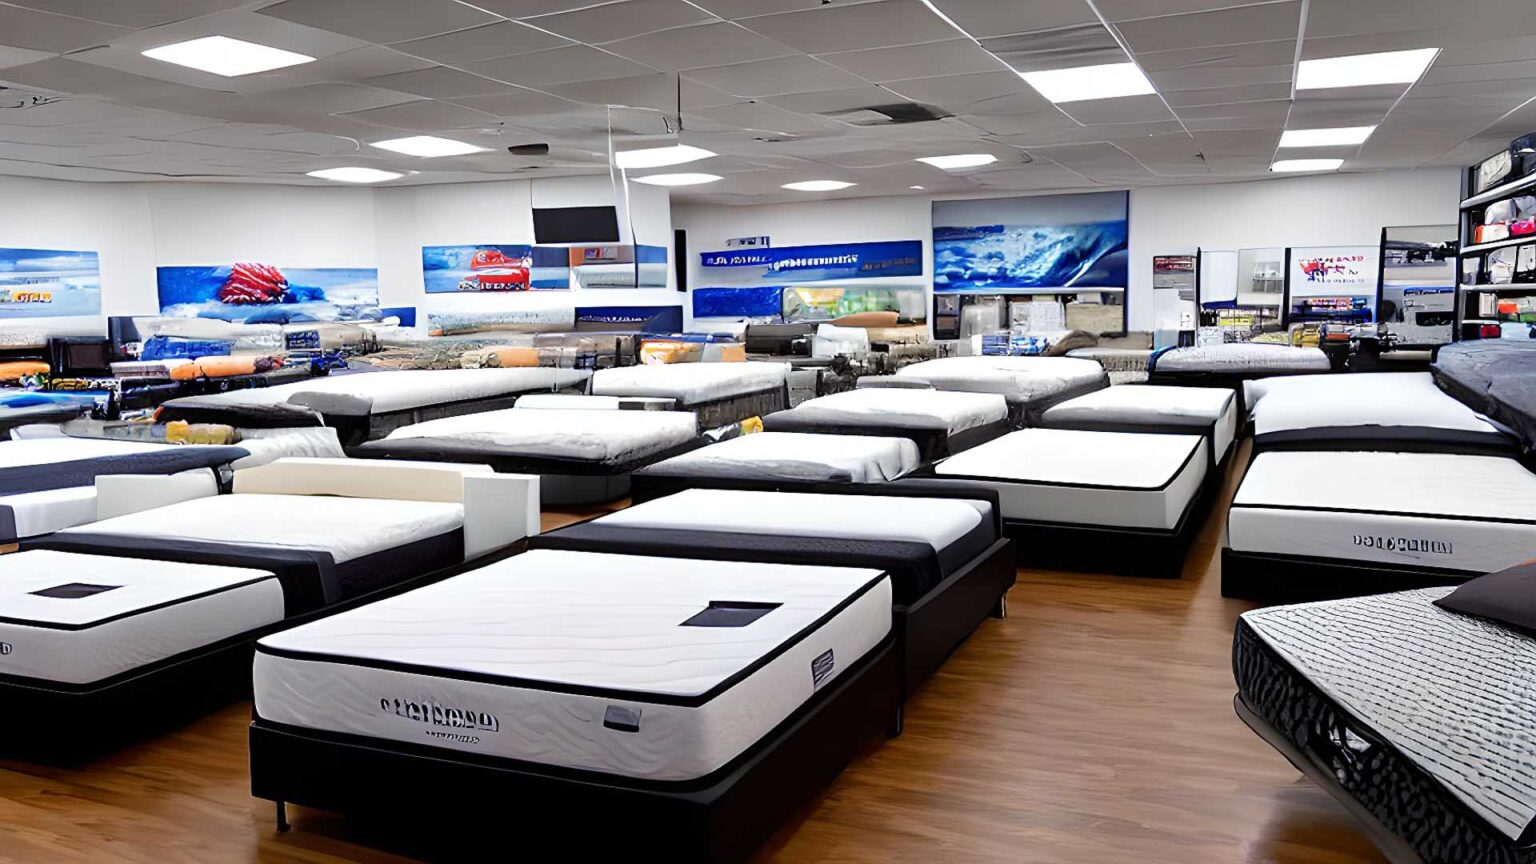 Mattress Stores, mattress dealers, and mattress retailers near me in Rochester, NY